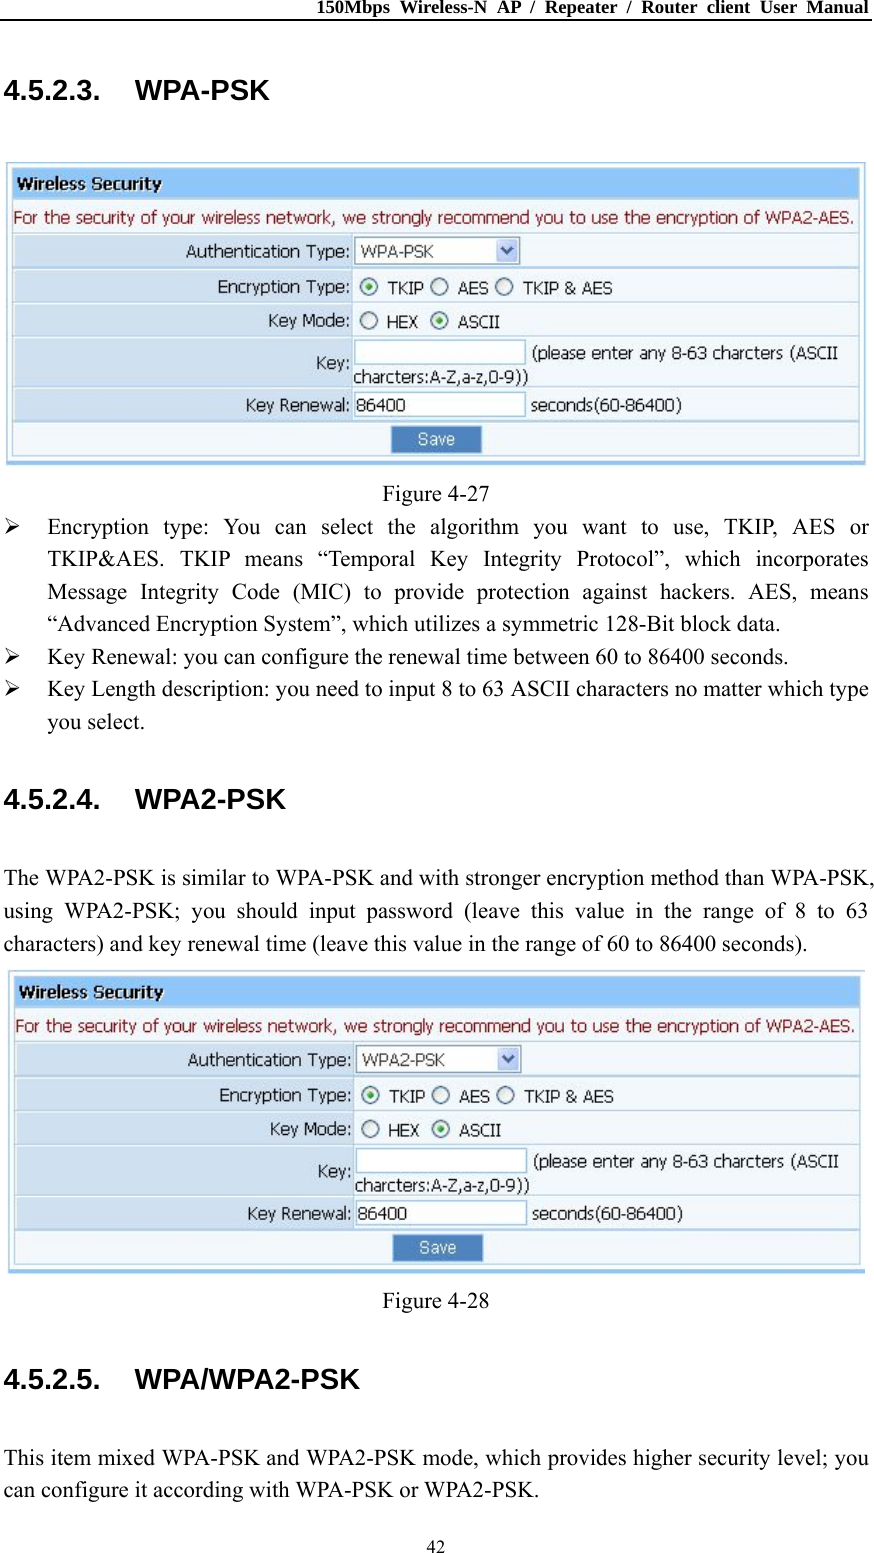 150Mbps Wireless-N AP / Repeater / Router client User Manual  424.5.2.3. WPA-PSK  Figure 4-27  Encryption type: You can select the algorithm you want to use, TKIP, AES or TKIP&amp;AES. TKIP means “Temporal Key Integrity Protocol”, which incorporates Message Integrity Code (MIC) to provide protection against hackers. AES, means “Advanced Encryption System”, which utilizes a symmetric 128-Bit block data.  Key Renewal: you can configure the renewal time between 60 to 86400 seconds.  Key Length description: you need to input 8 to 63 ASCII characters no matter which type you select. 4.5.2.4. WPA2-PSK The WPA2-PSK is similar to WPA-PSK and with stronger encryption method than WPA-PSK, using WPA2-PSK; you should input password (leave this value in the range of 8 to 63 characters) and key renewal time (leave this value in the range of 60 to 86400 seconds).  Figure 4-28 4.5.2.5. WPA/WPA2-PSK This item mixed WPA-PSK and WPA2-PSK mode, which provides higher security level; you can configure it according with WPA-PSK or WPA2-PSK. 